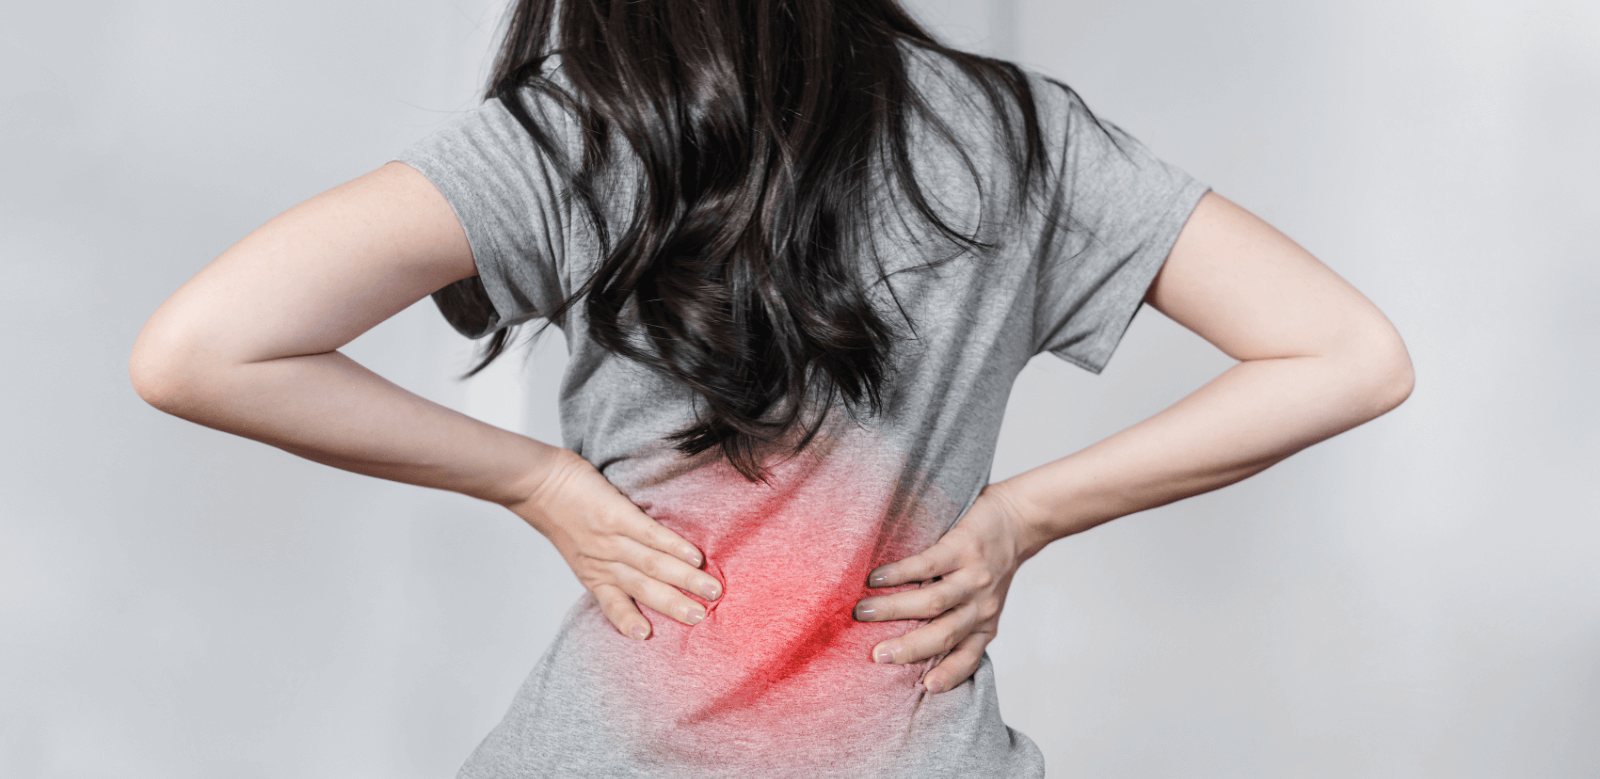 How Anxiety Causes Back Pain: And How to Stop It